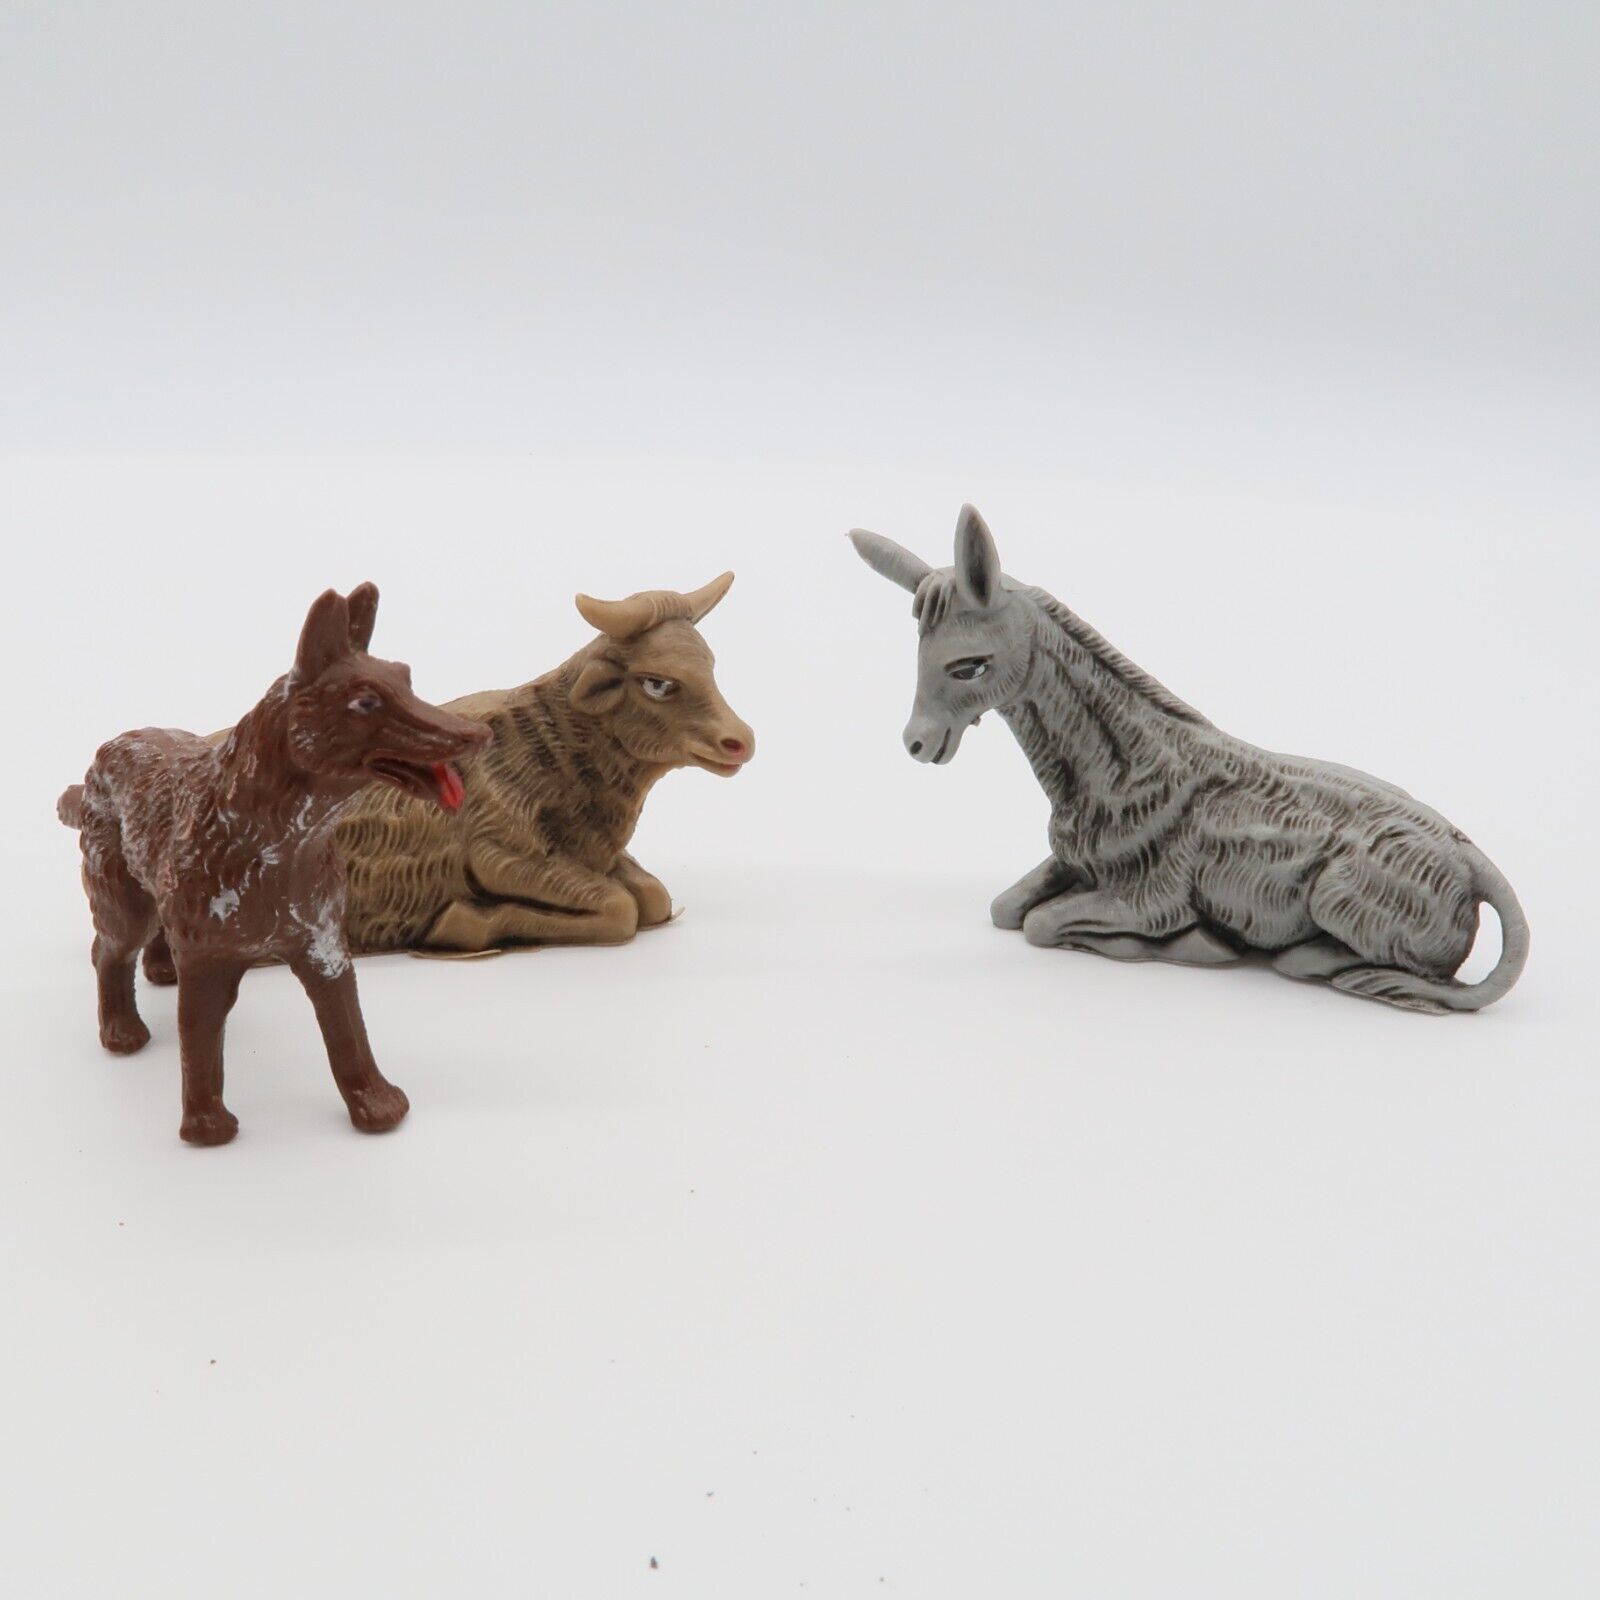 Vintage Nativity Animal Figures Handpainted Dog Donkey Cow Replacement Figures